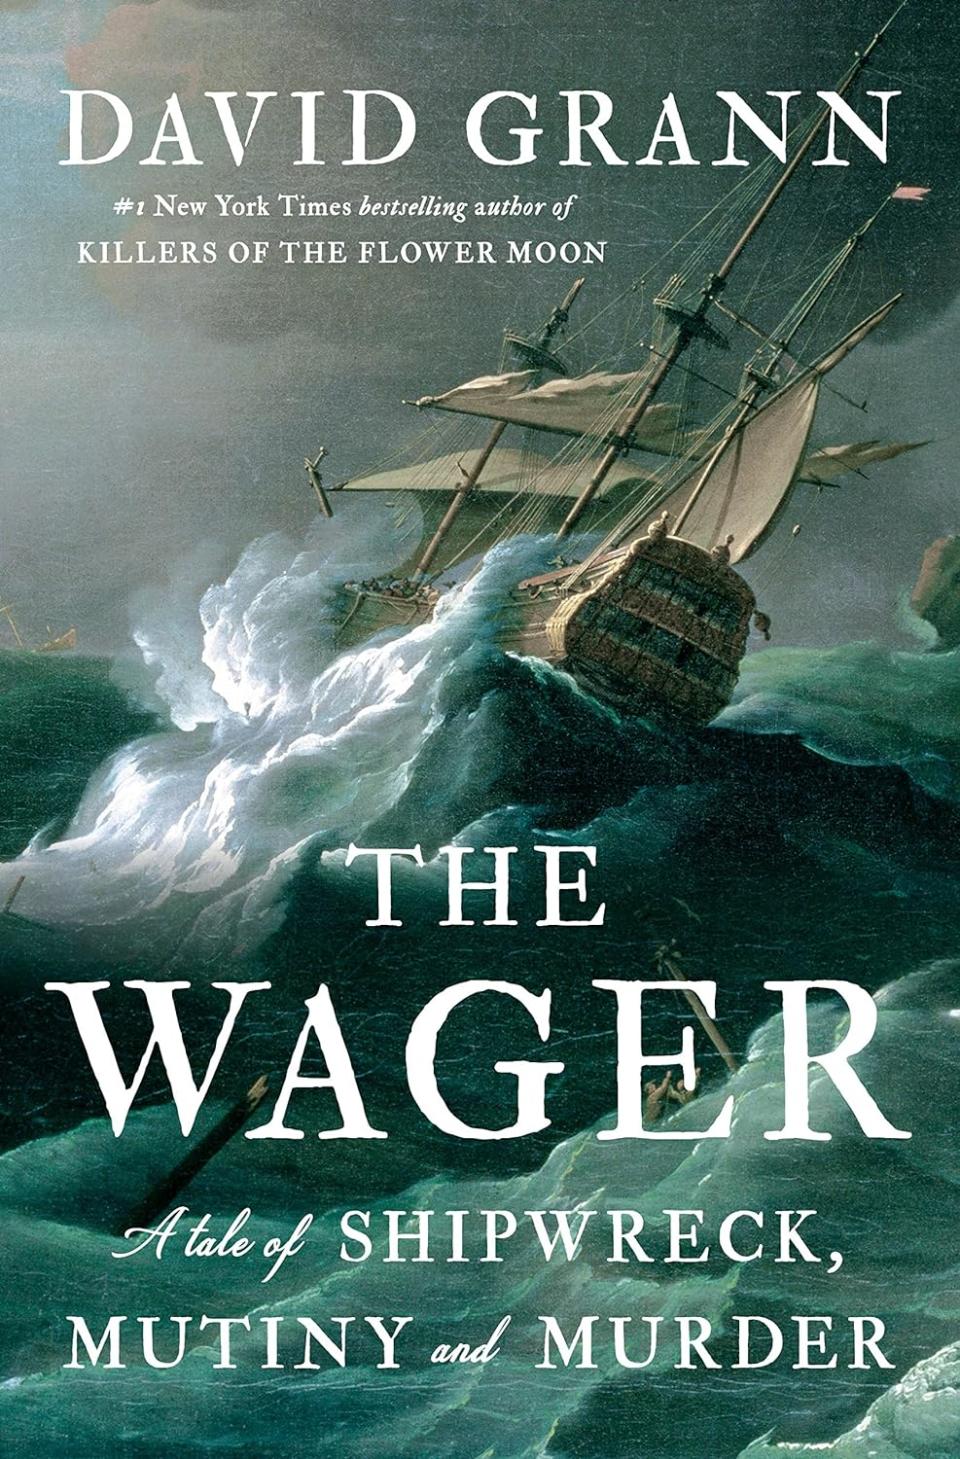 "The Wager: A Tale of Shipwreck, Mutiny and Murder," by David Grann